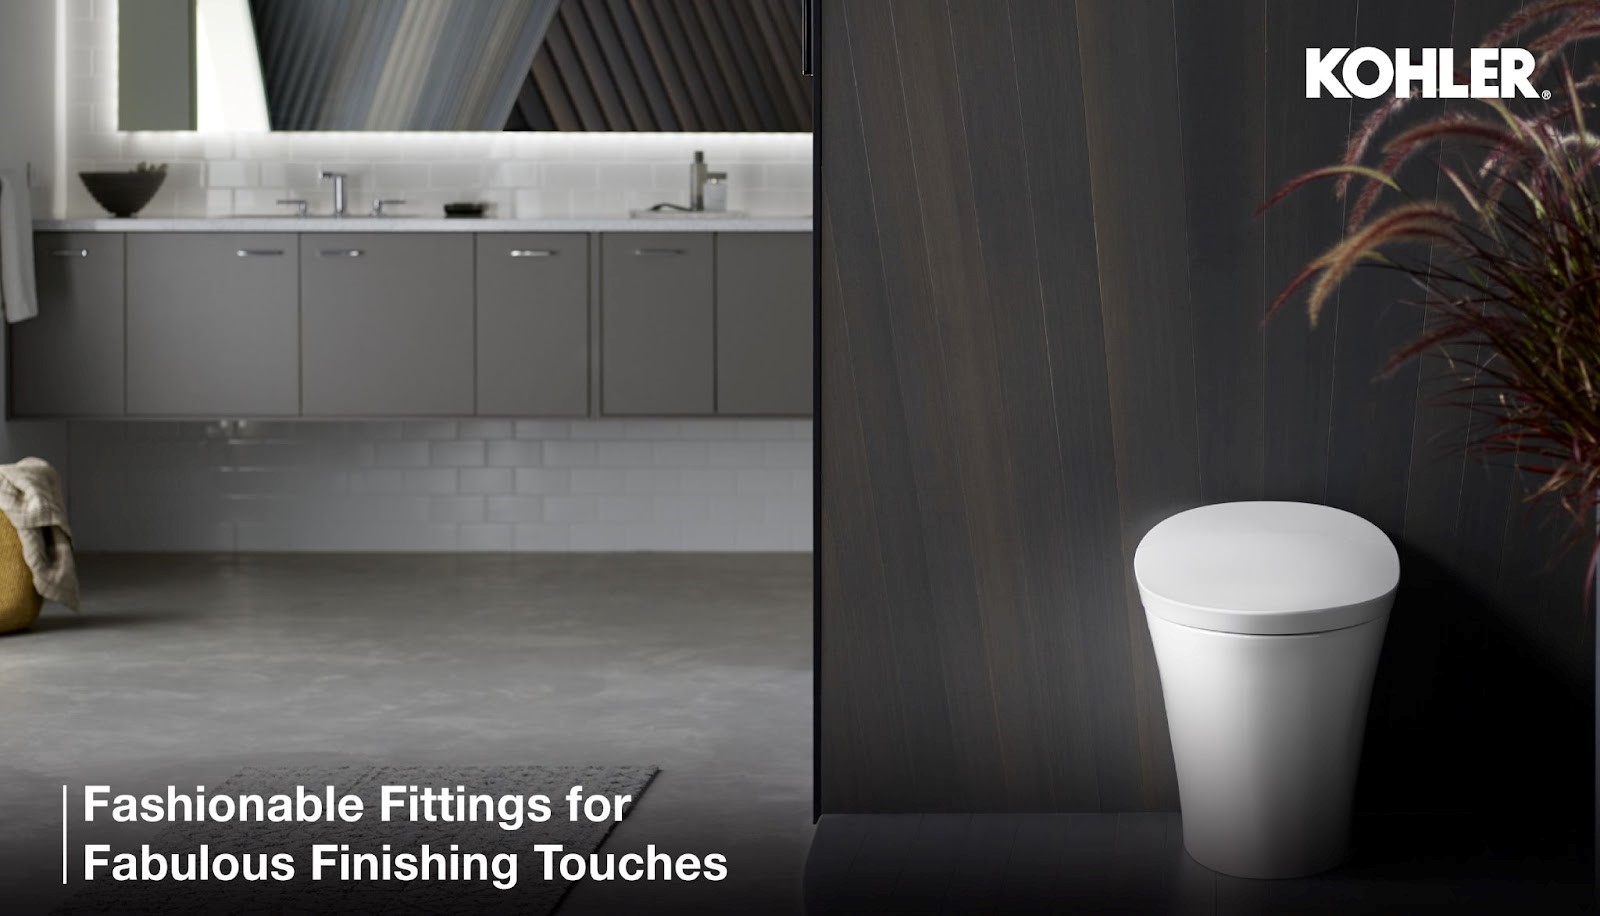 Bathroom Brilliance: Discover Top-notch Fittings, Fixtures, and Accessories